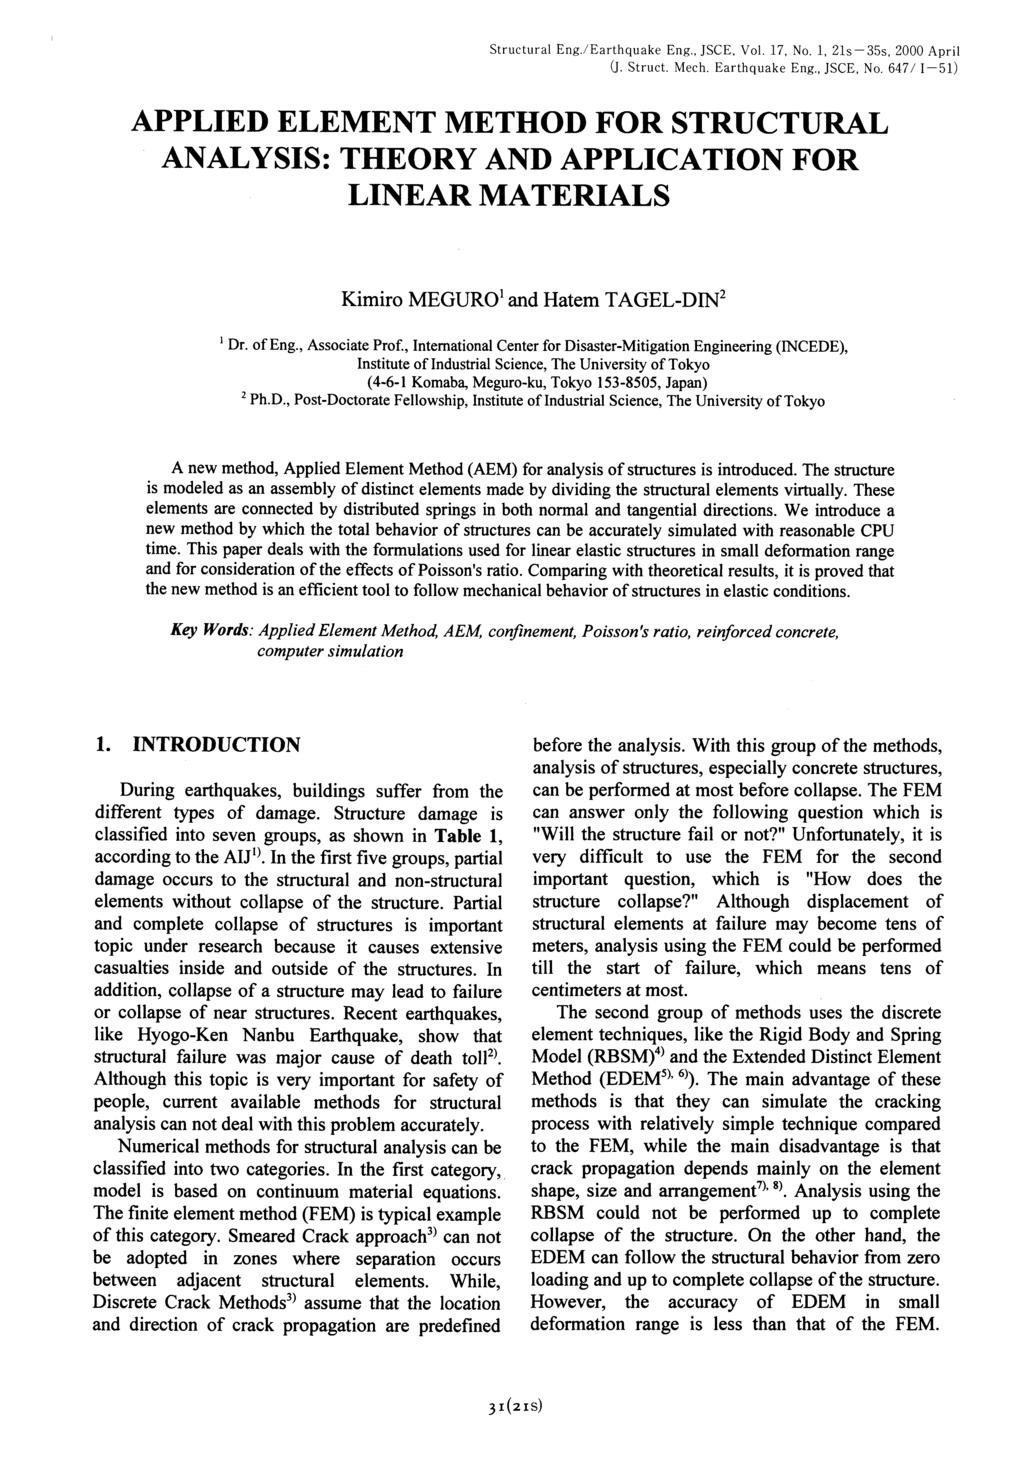 Structural Eng./Earthquake Eng., JSCE, Vol. 17, No. 1, 21s-35s, 2000 April (J. Struct. Mech. Earthquake Eng., JSCE, No.